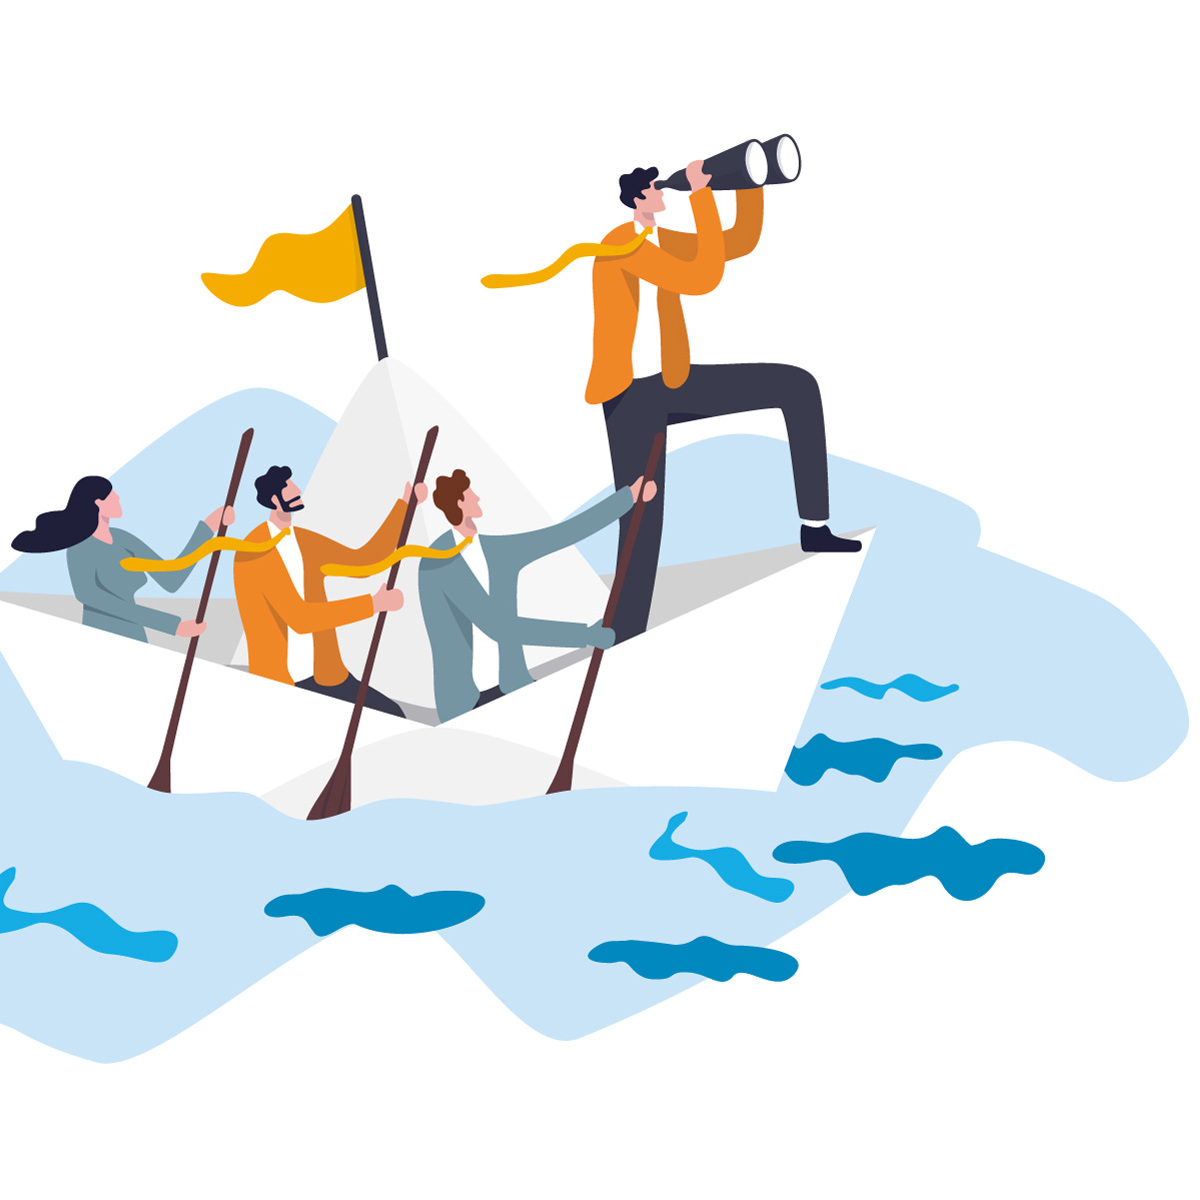 Illustration of people in boat